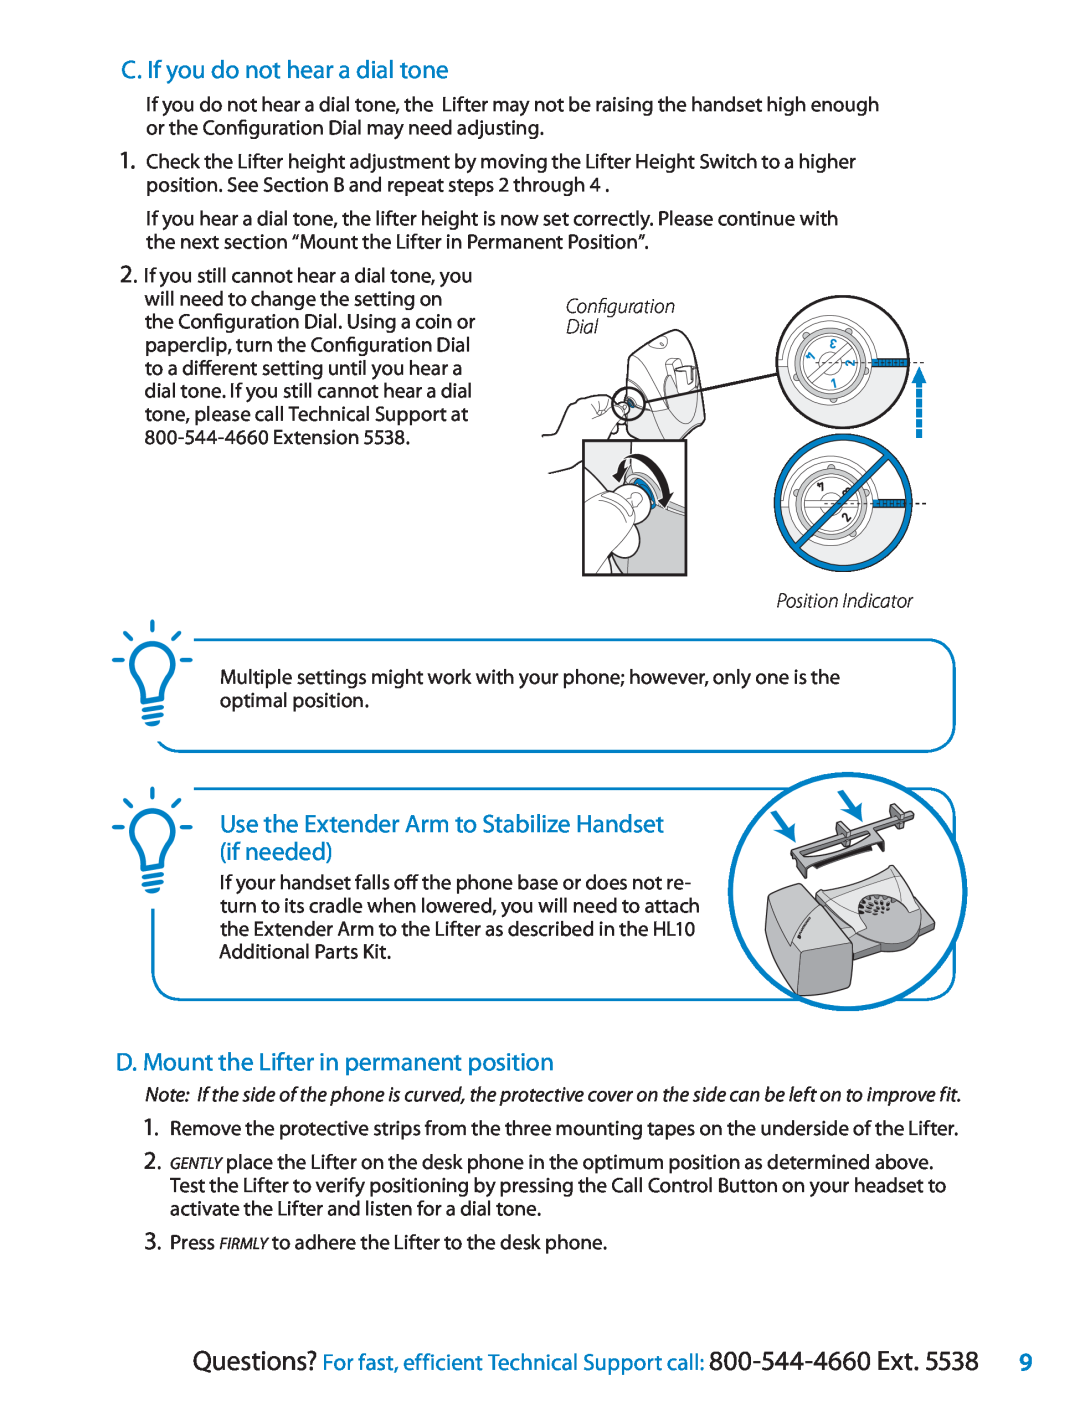 Univex Wireless Headset System setup guide C. If you do not hear a dial tone, D. Mount the Lifter in permanent position 